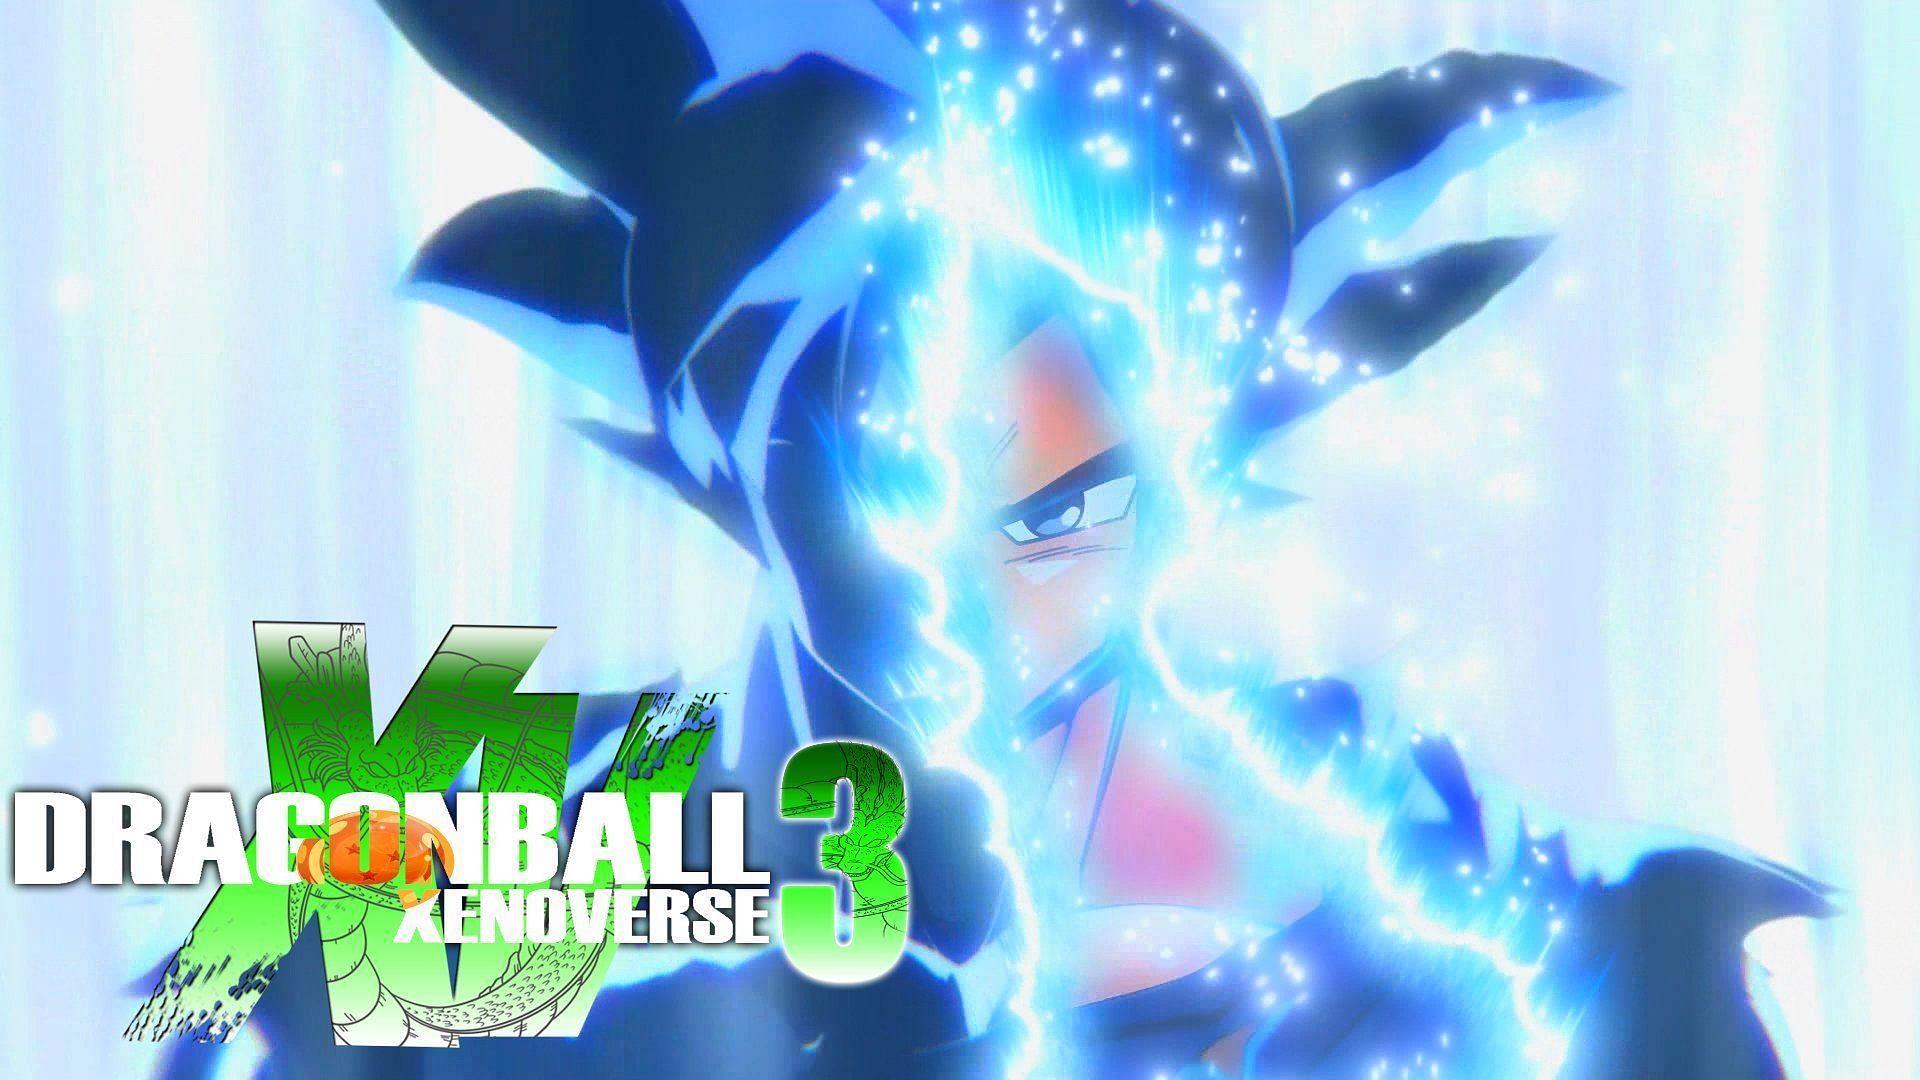 Dragon Ball Xenoverse Season 3: Expected release date, leaks, and more